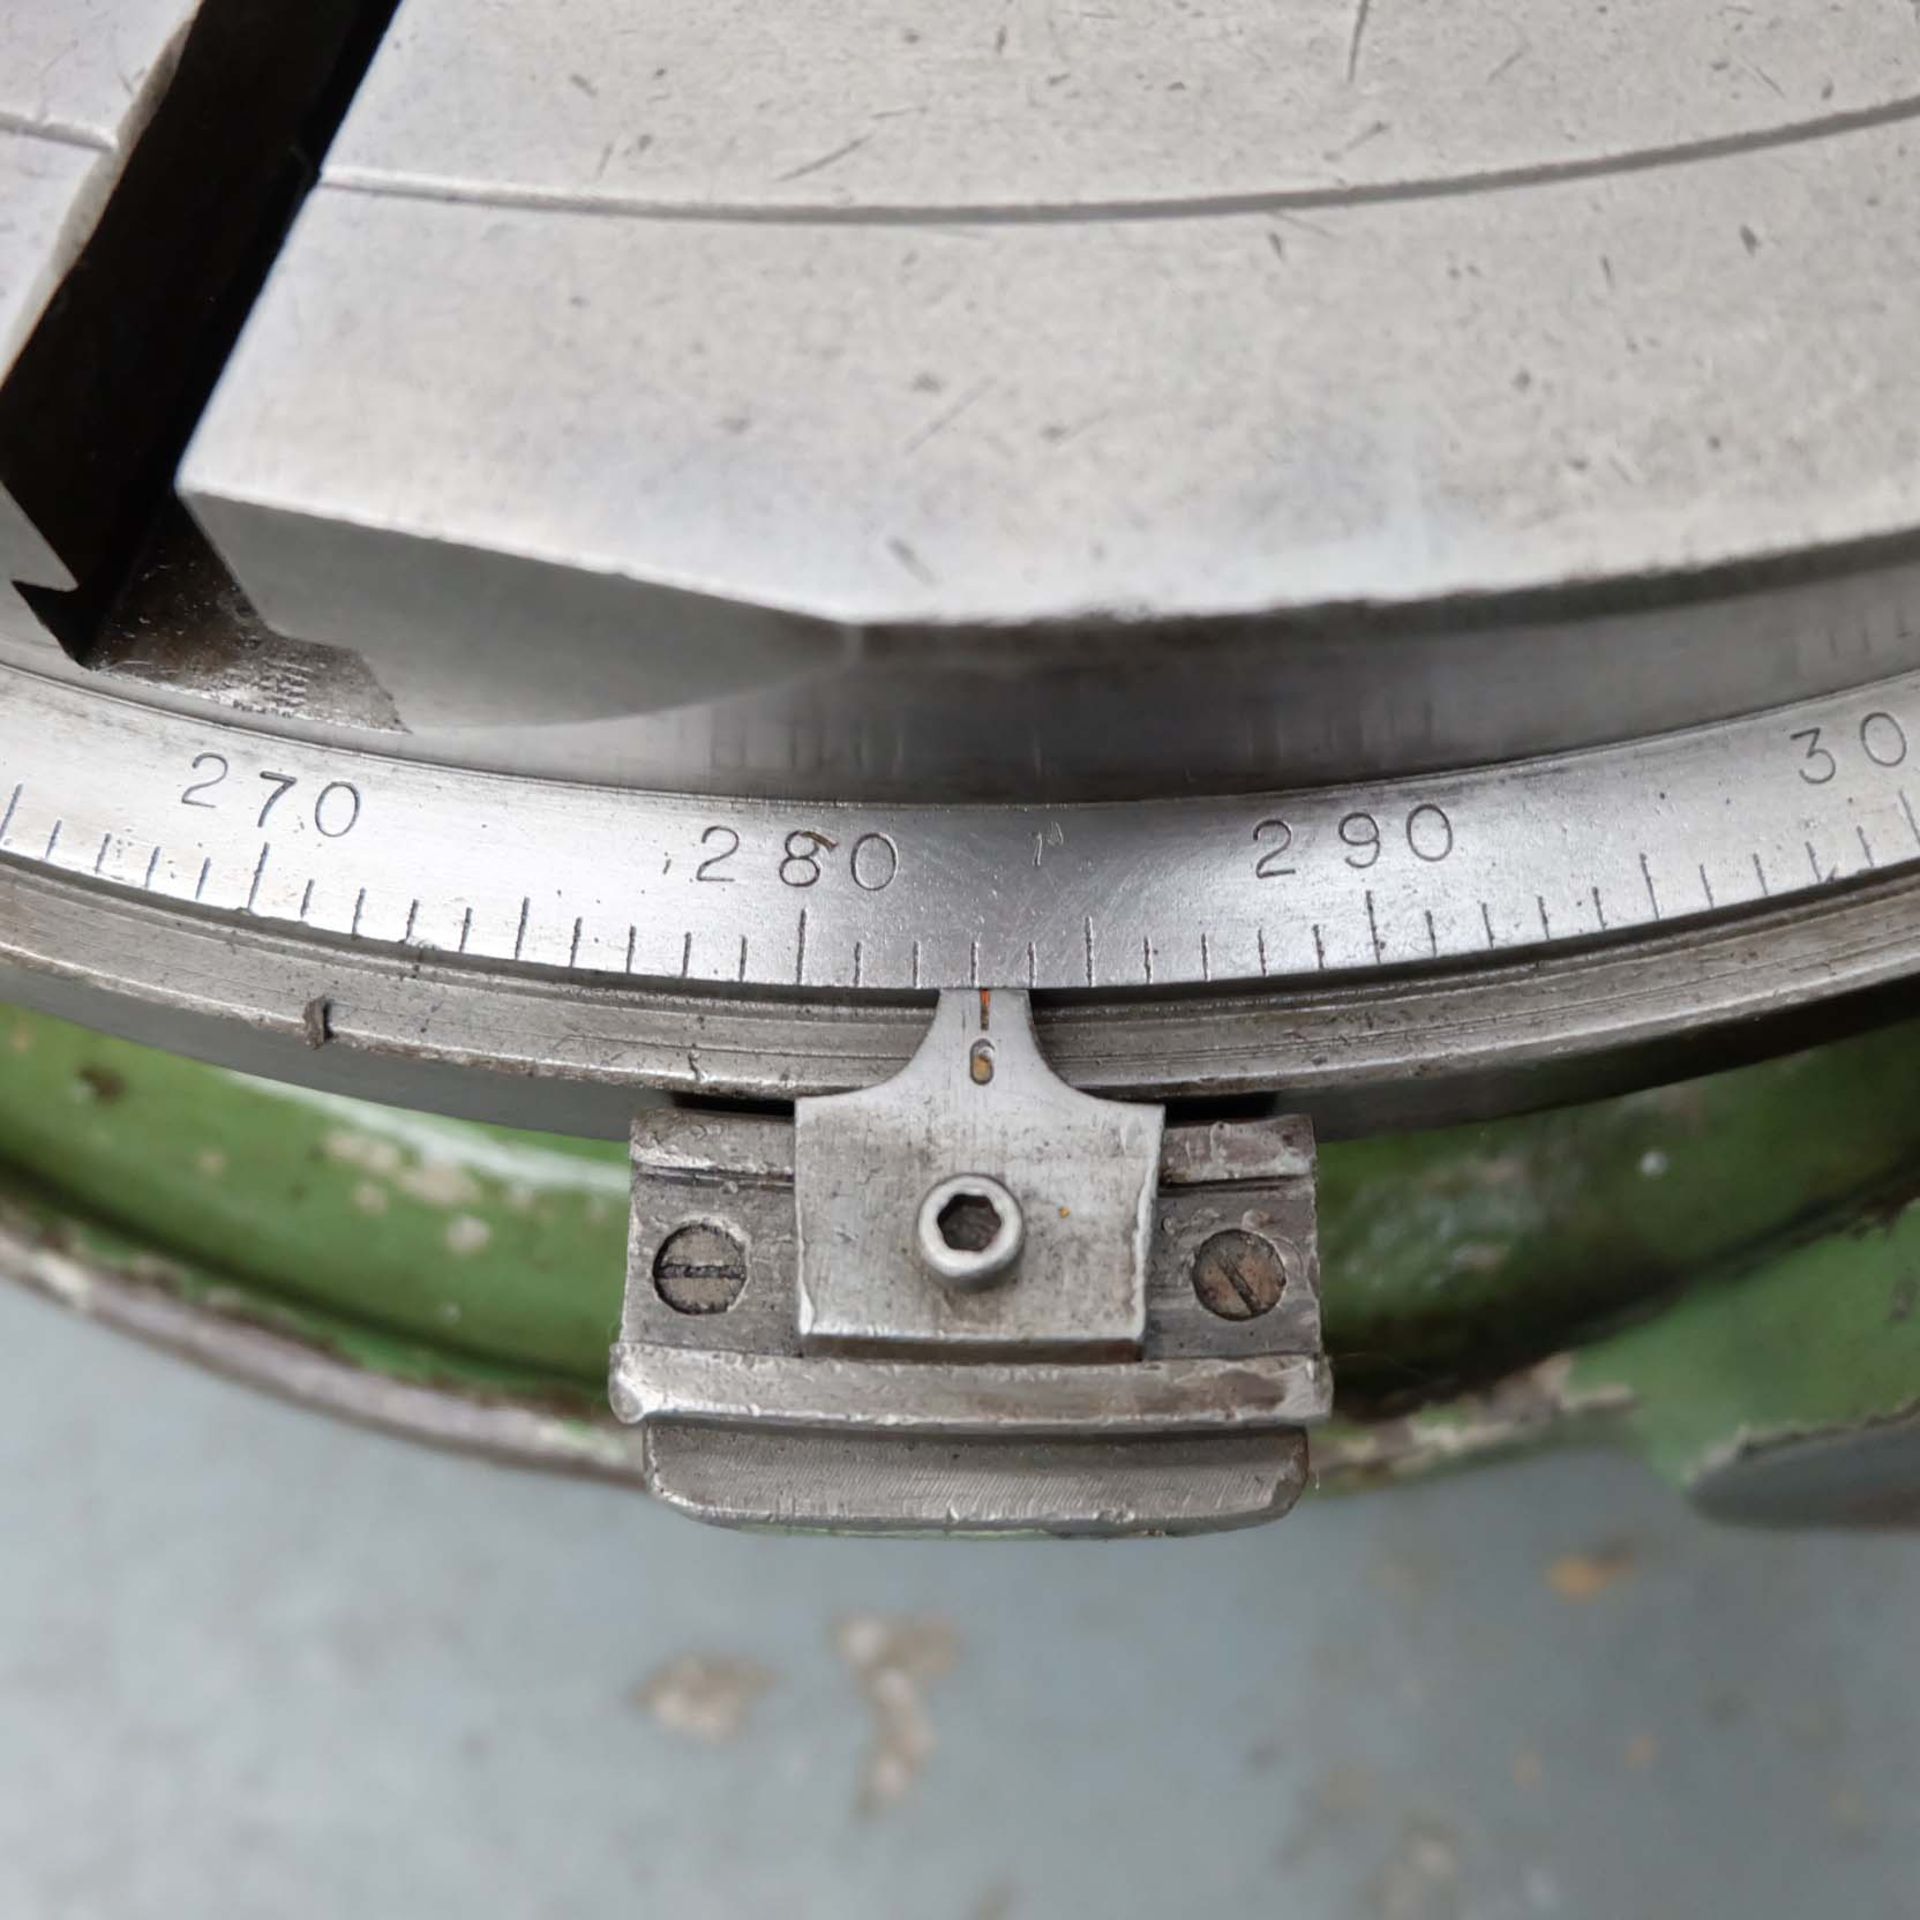 MECA 19 1/2" Rotary Table. With Extended Handwheel 14". Tee Slotted. - Image 5 of 7